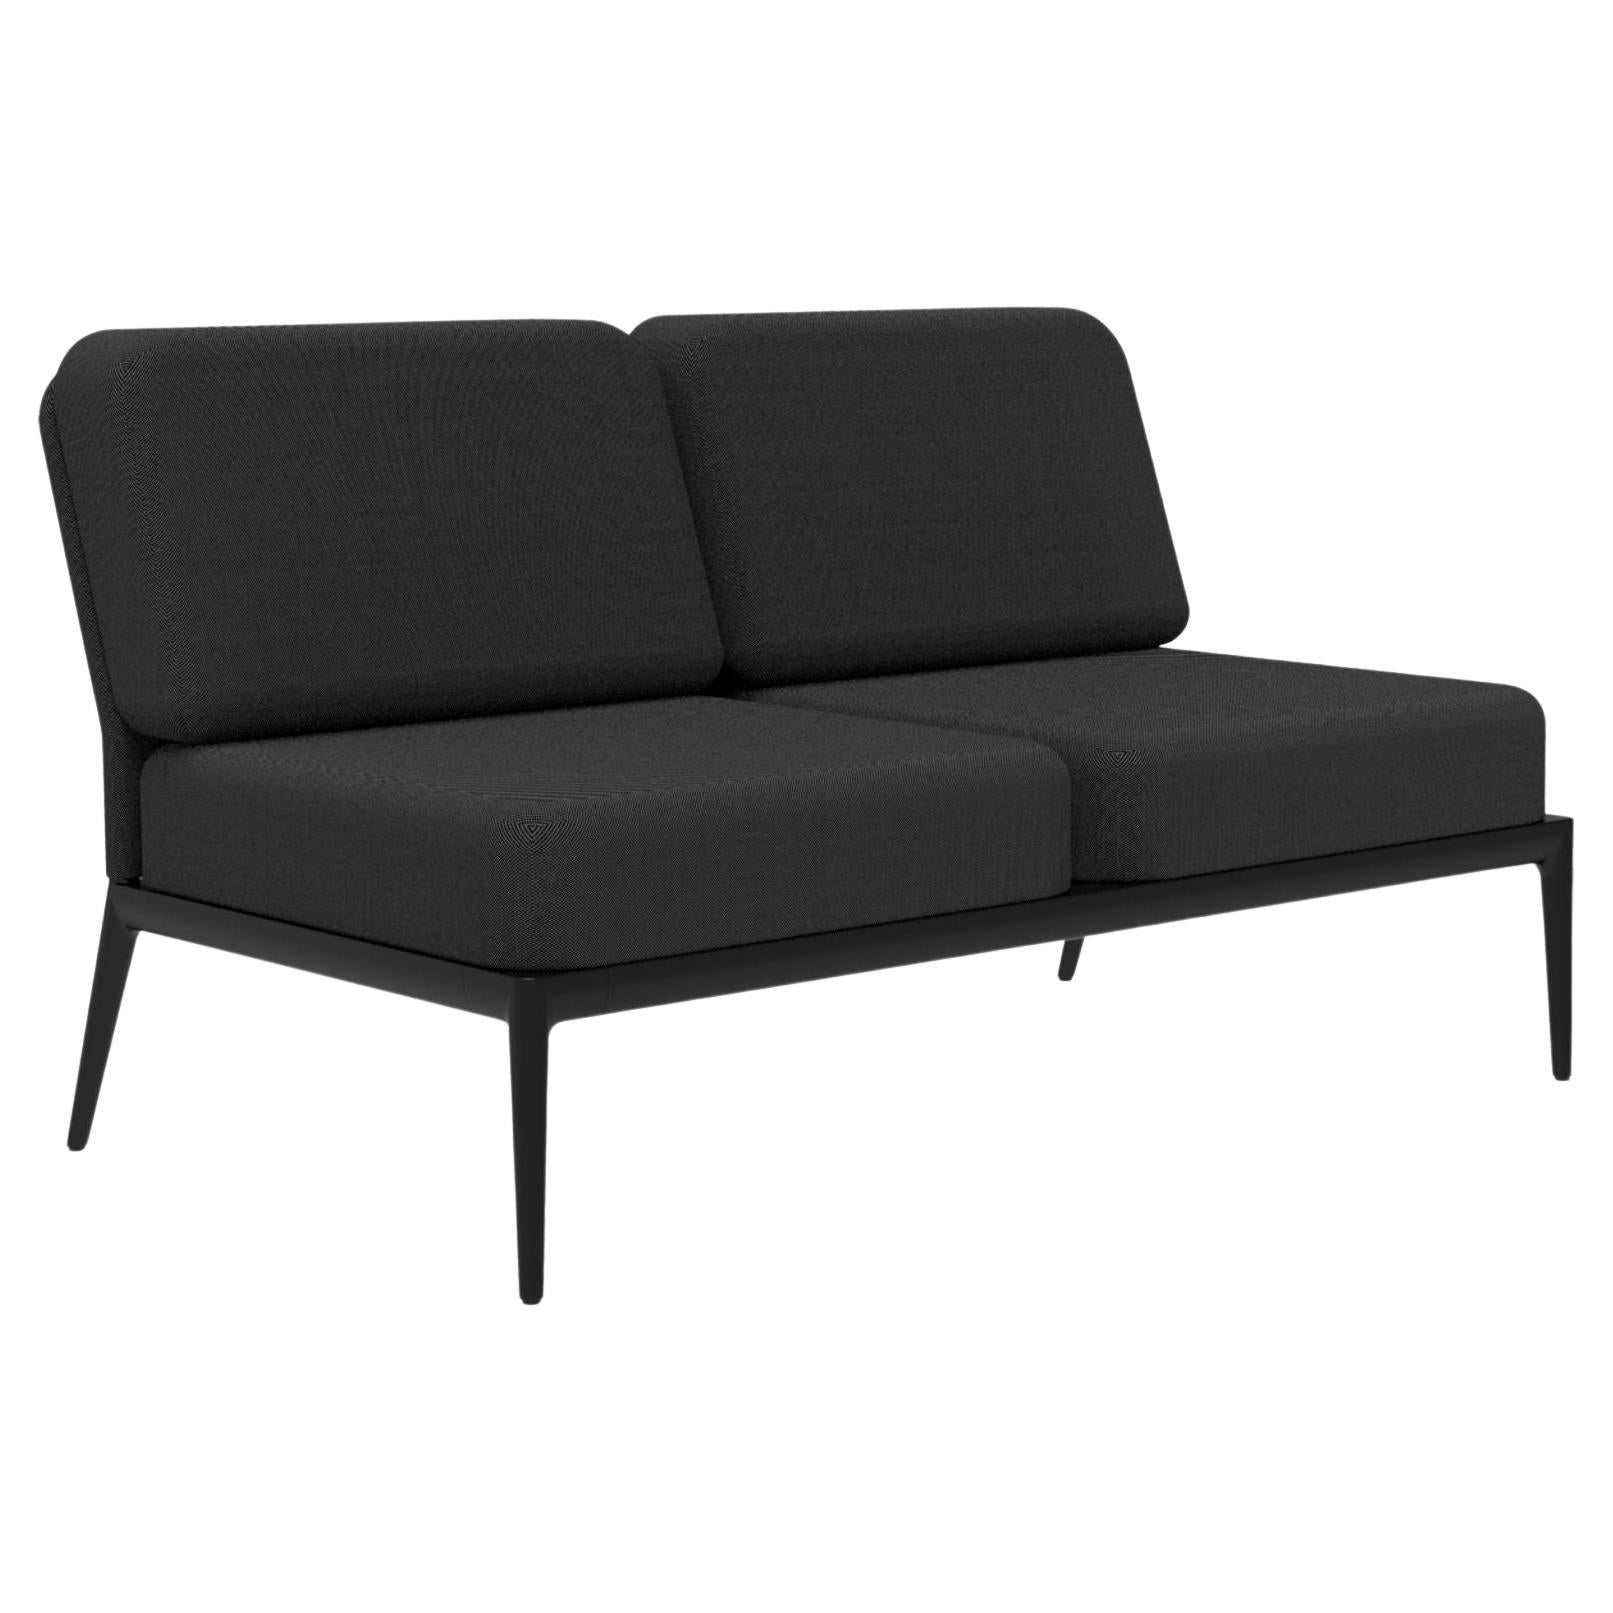 Cover Black Double Central Modular Sofa by Mowee